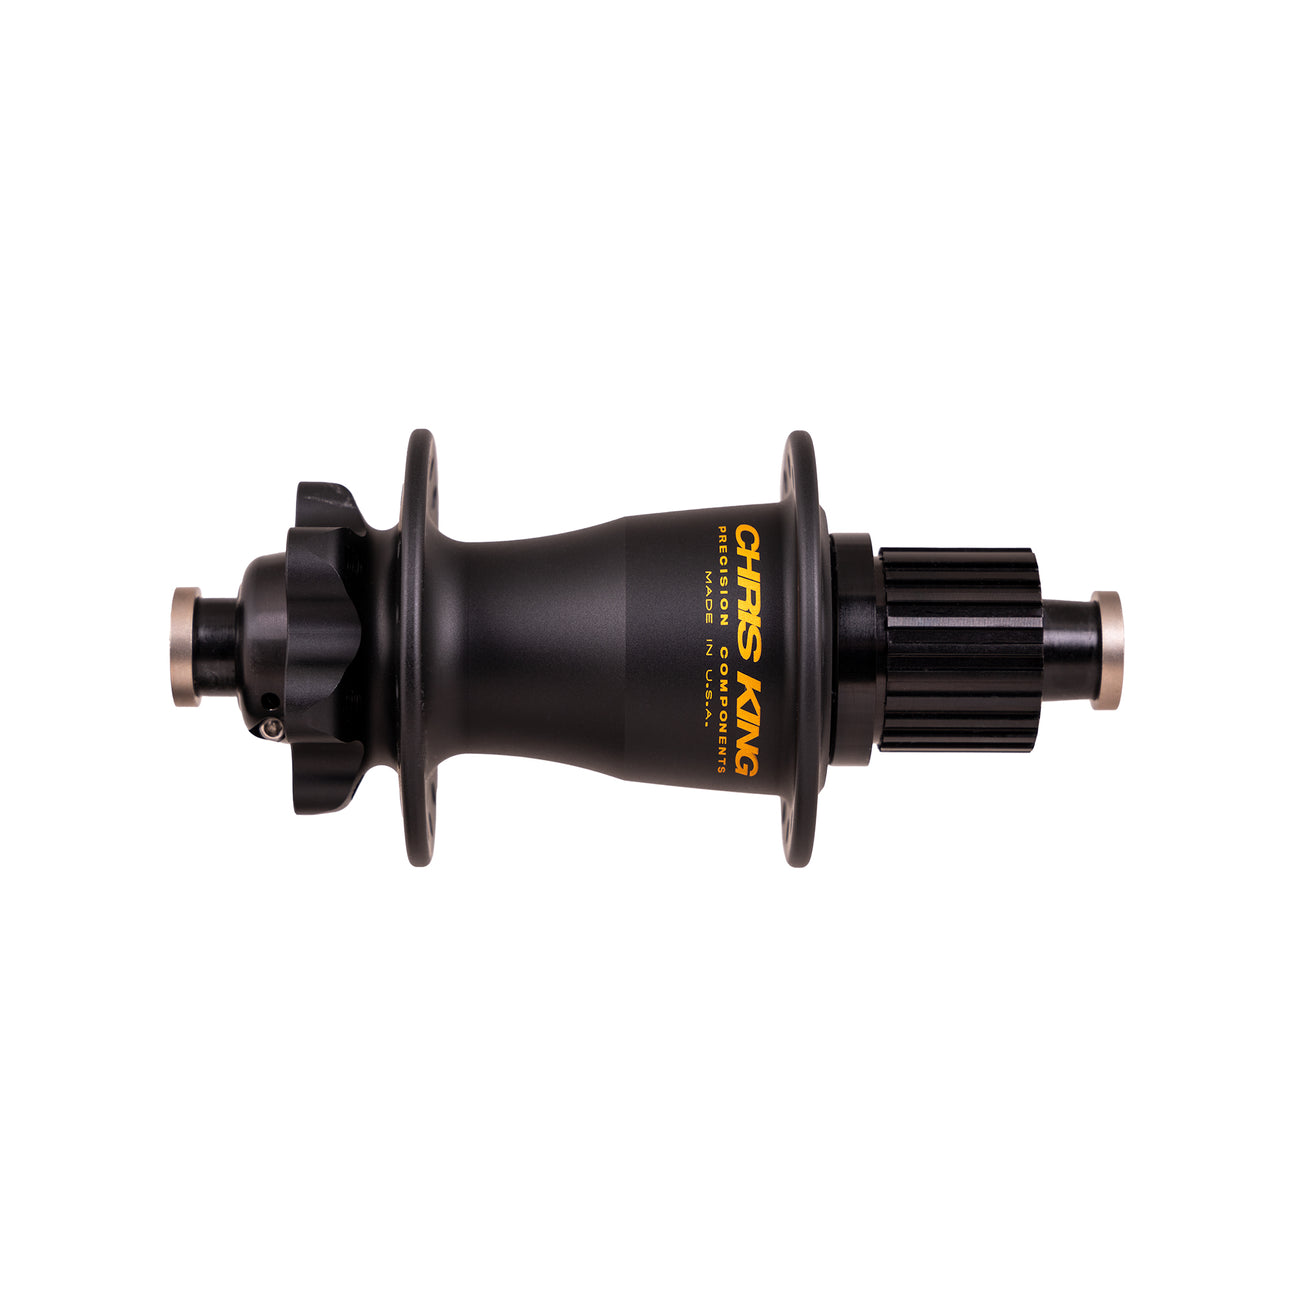 Chris King boost 6 bolt rear in two tone black/gold